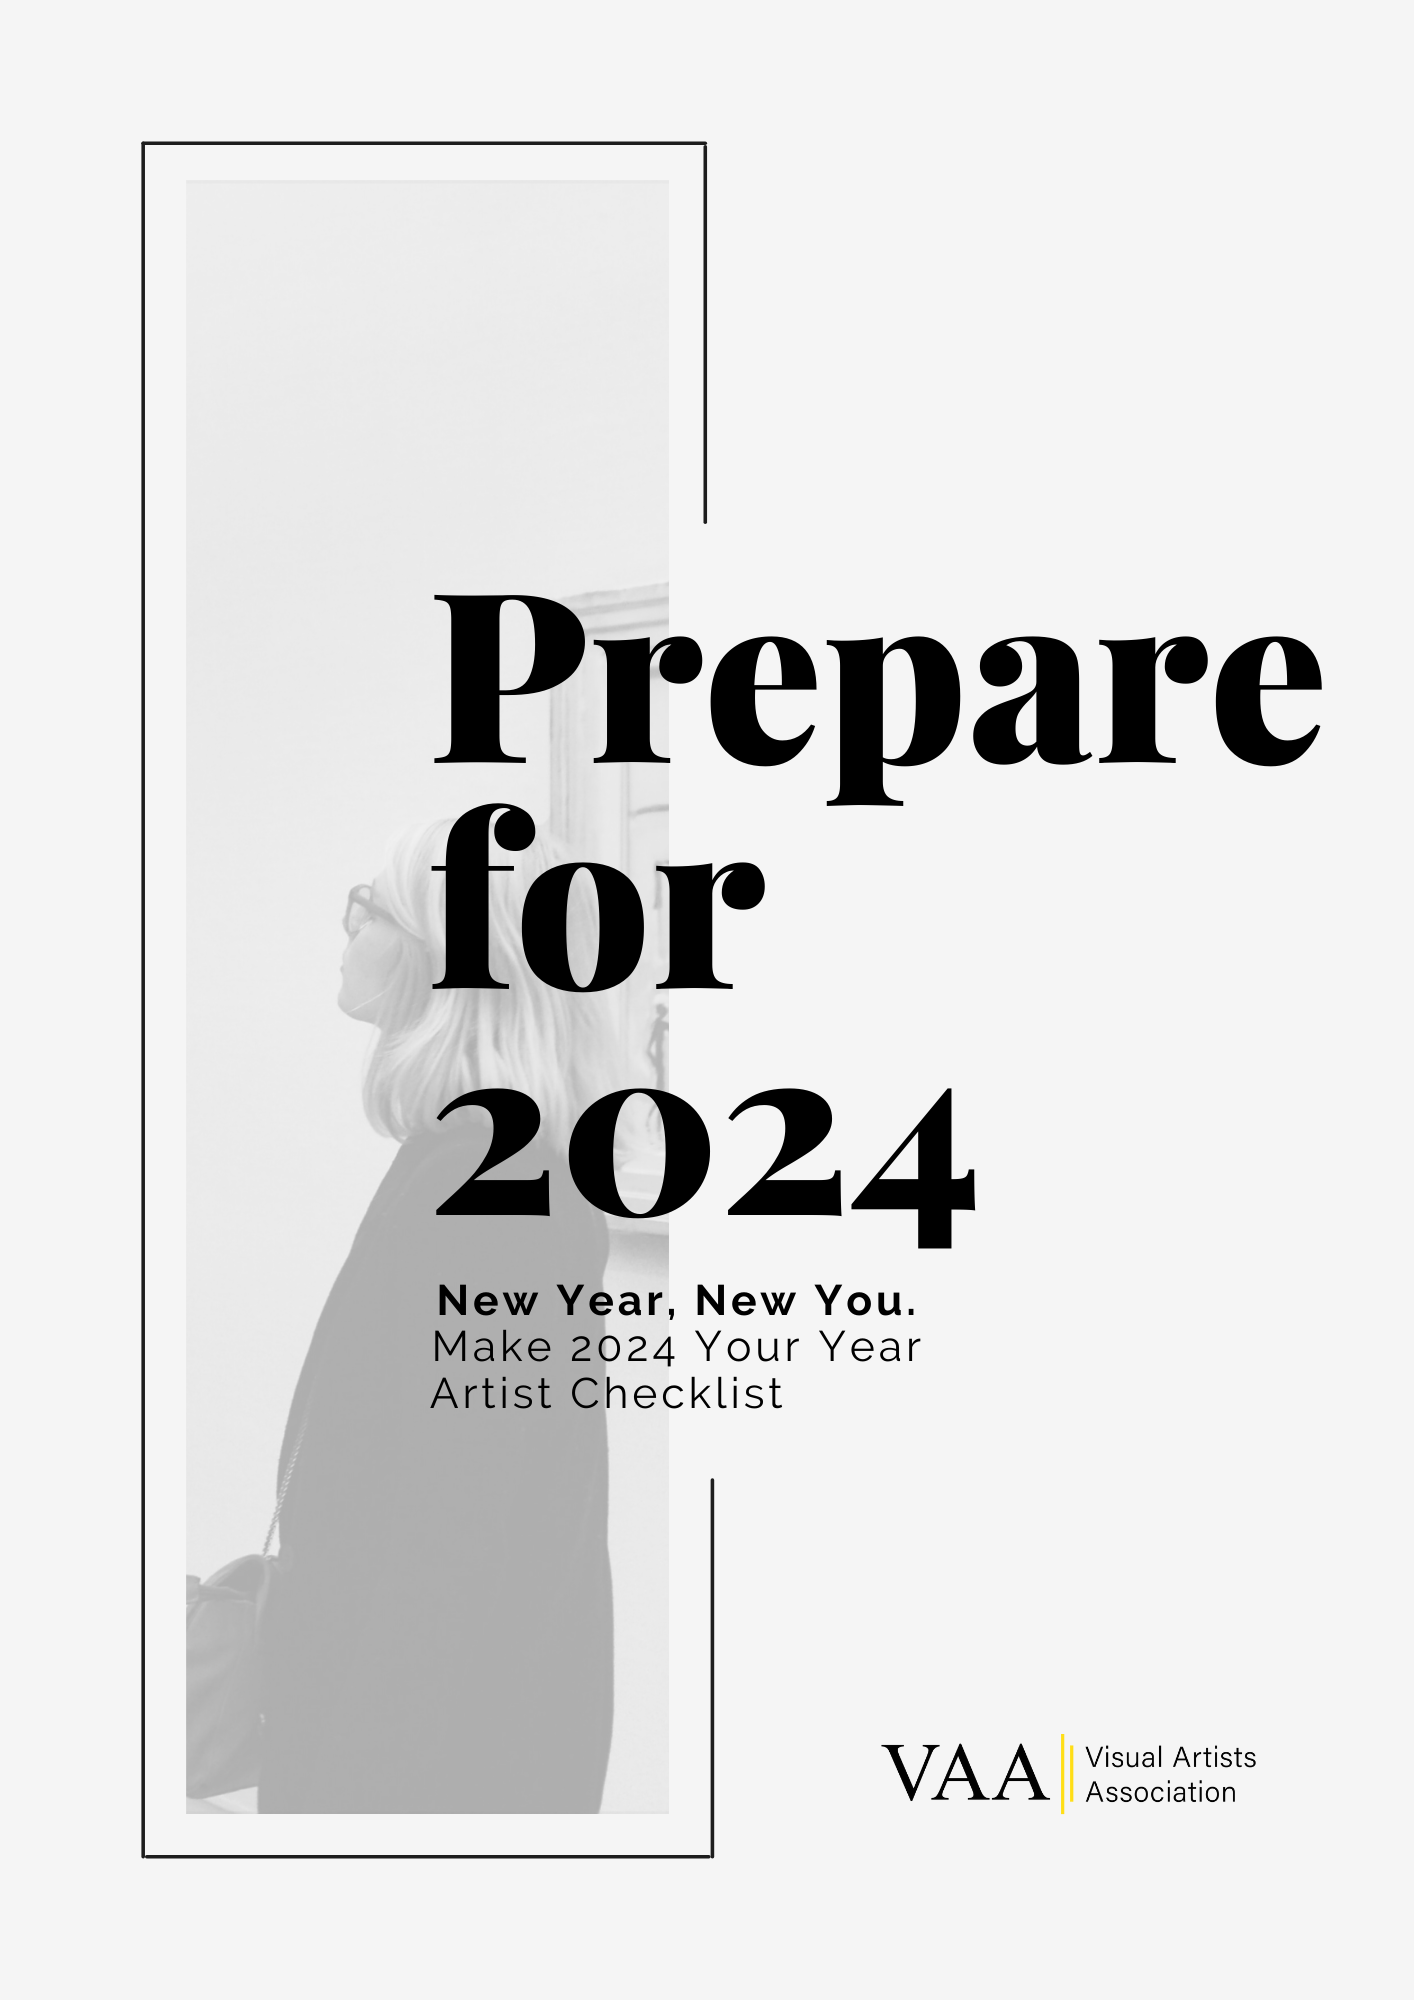 New Year, New You, Artists Goal Planner